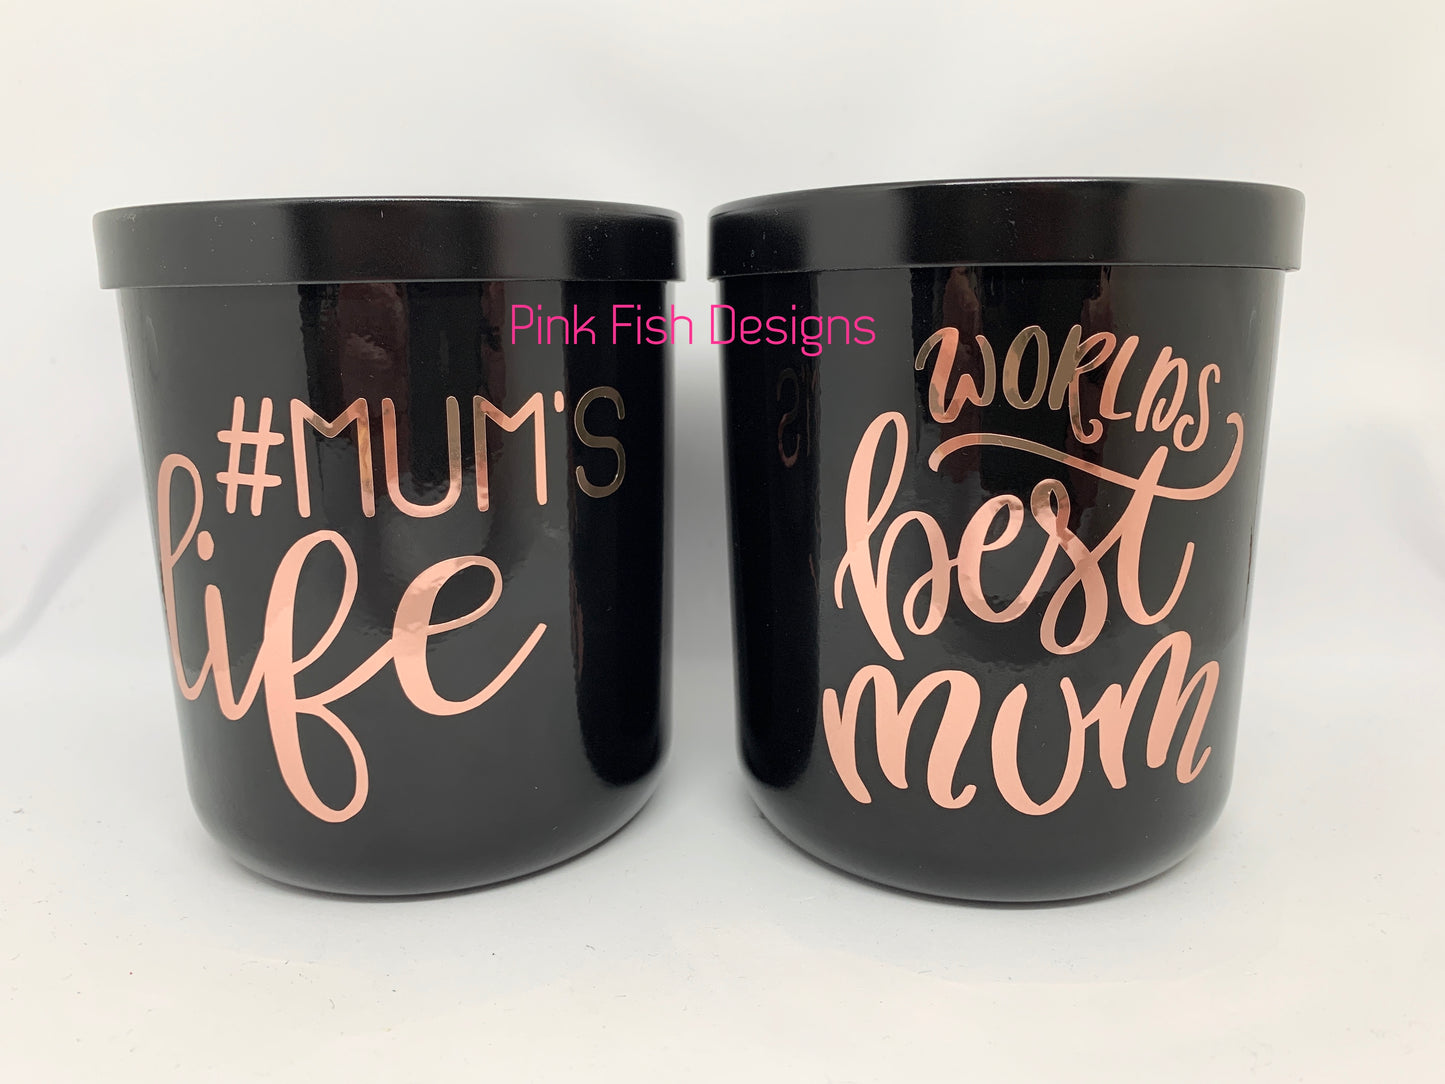 # Mums Life or Worlds Best Mum 400ml Soy Candle